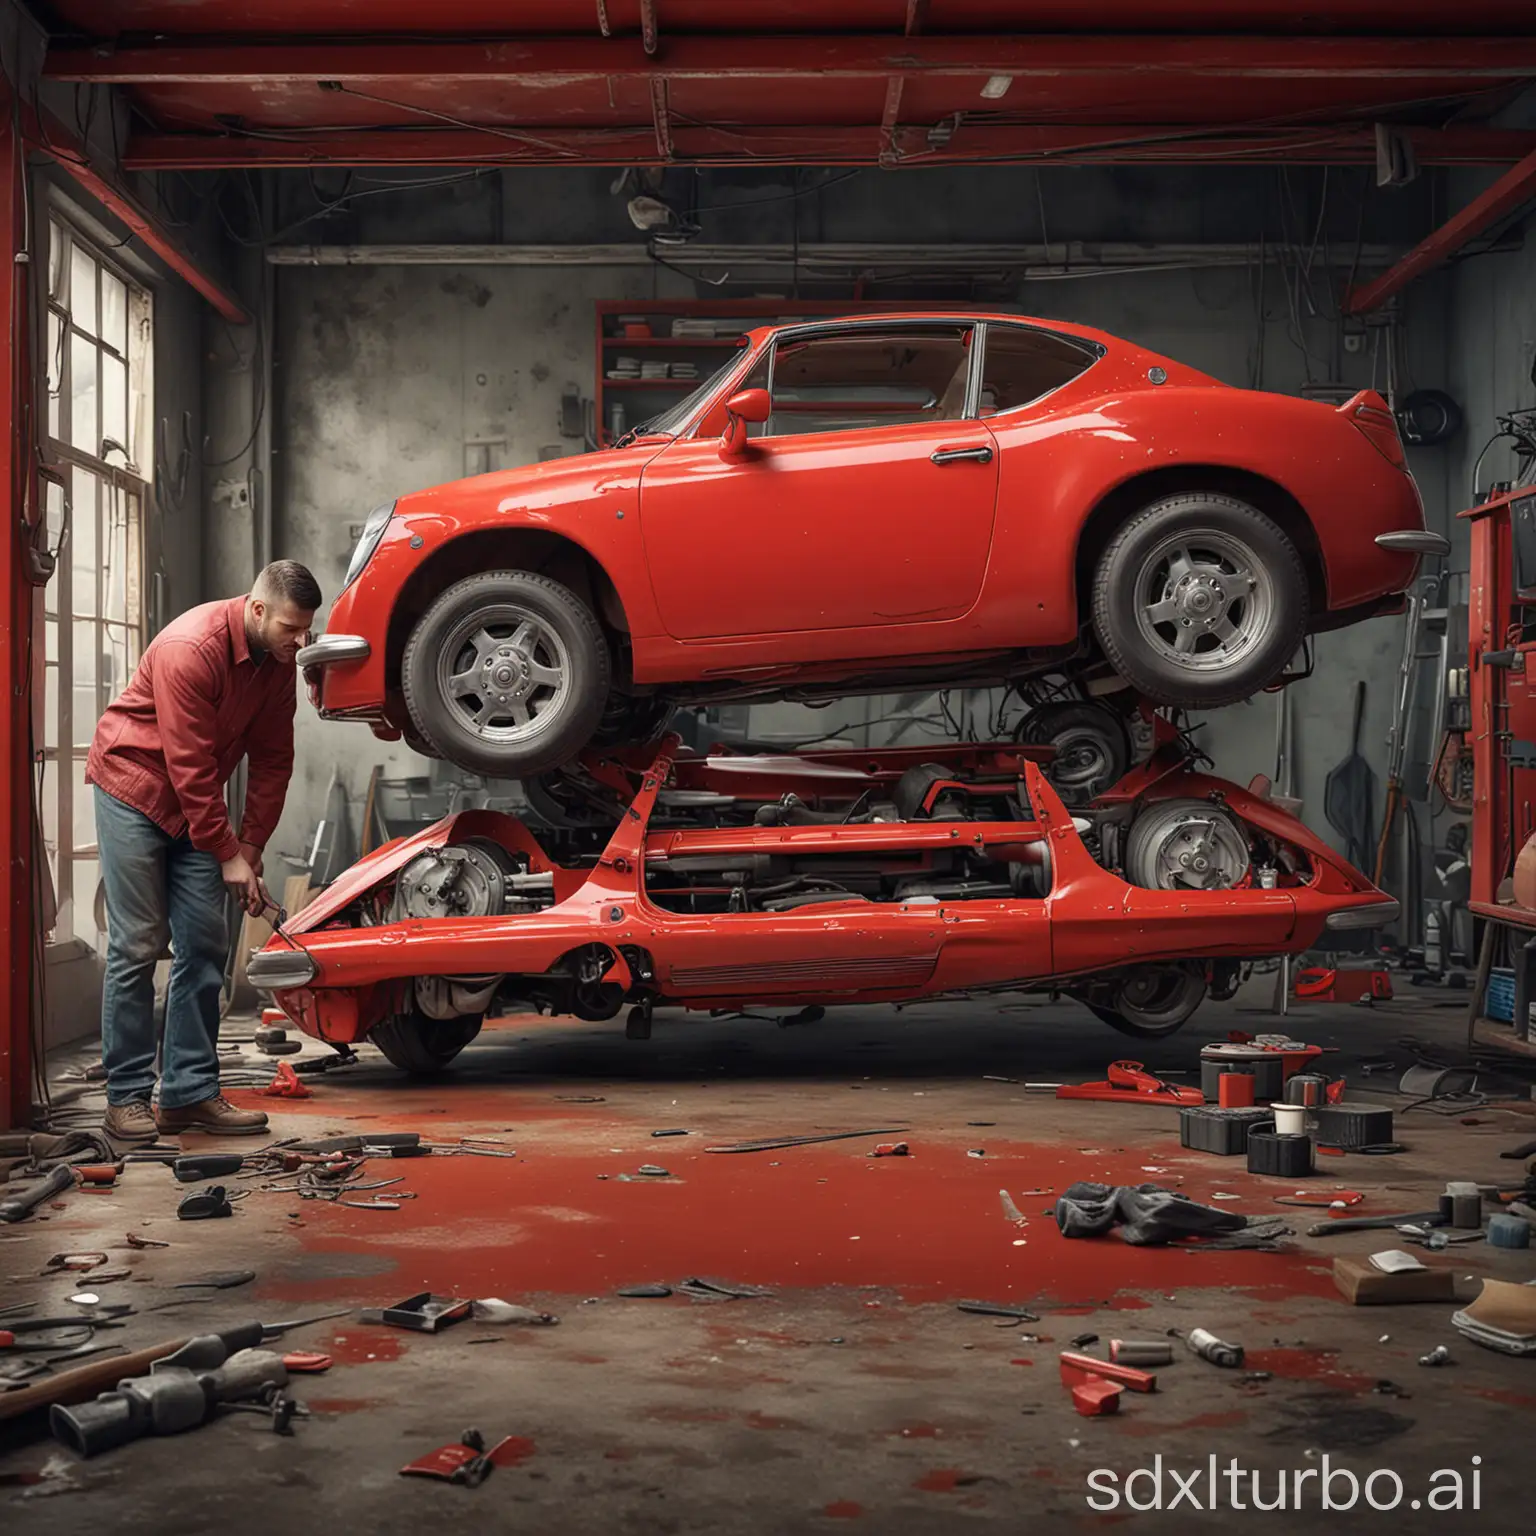 a photorealistic image of a real human repairing a authentic red car. The mechanic is repairing the car from underneath